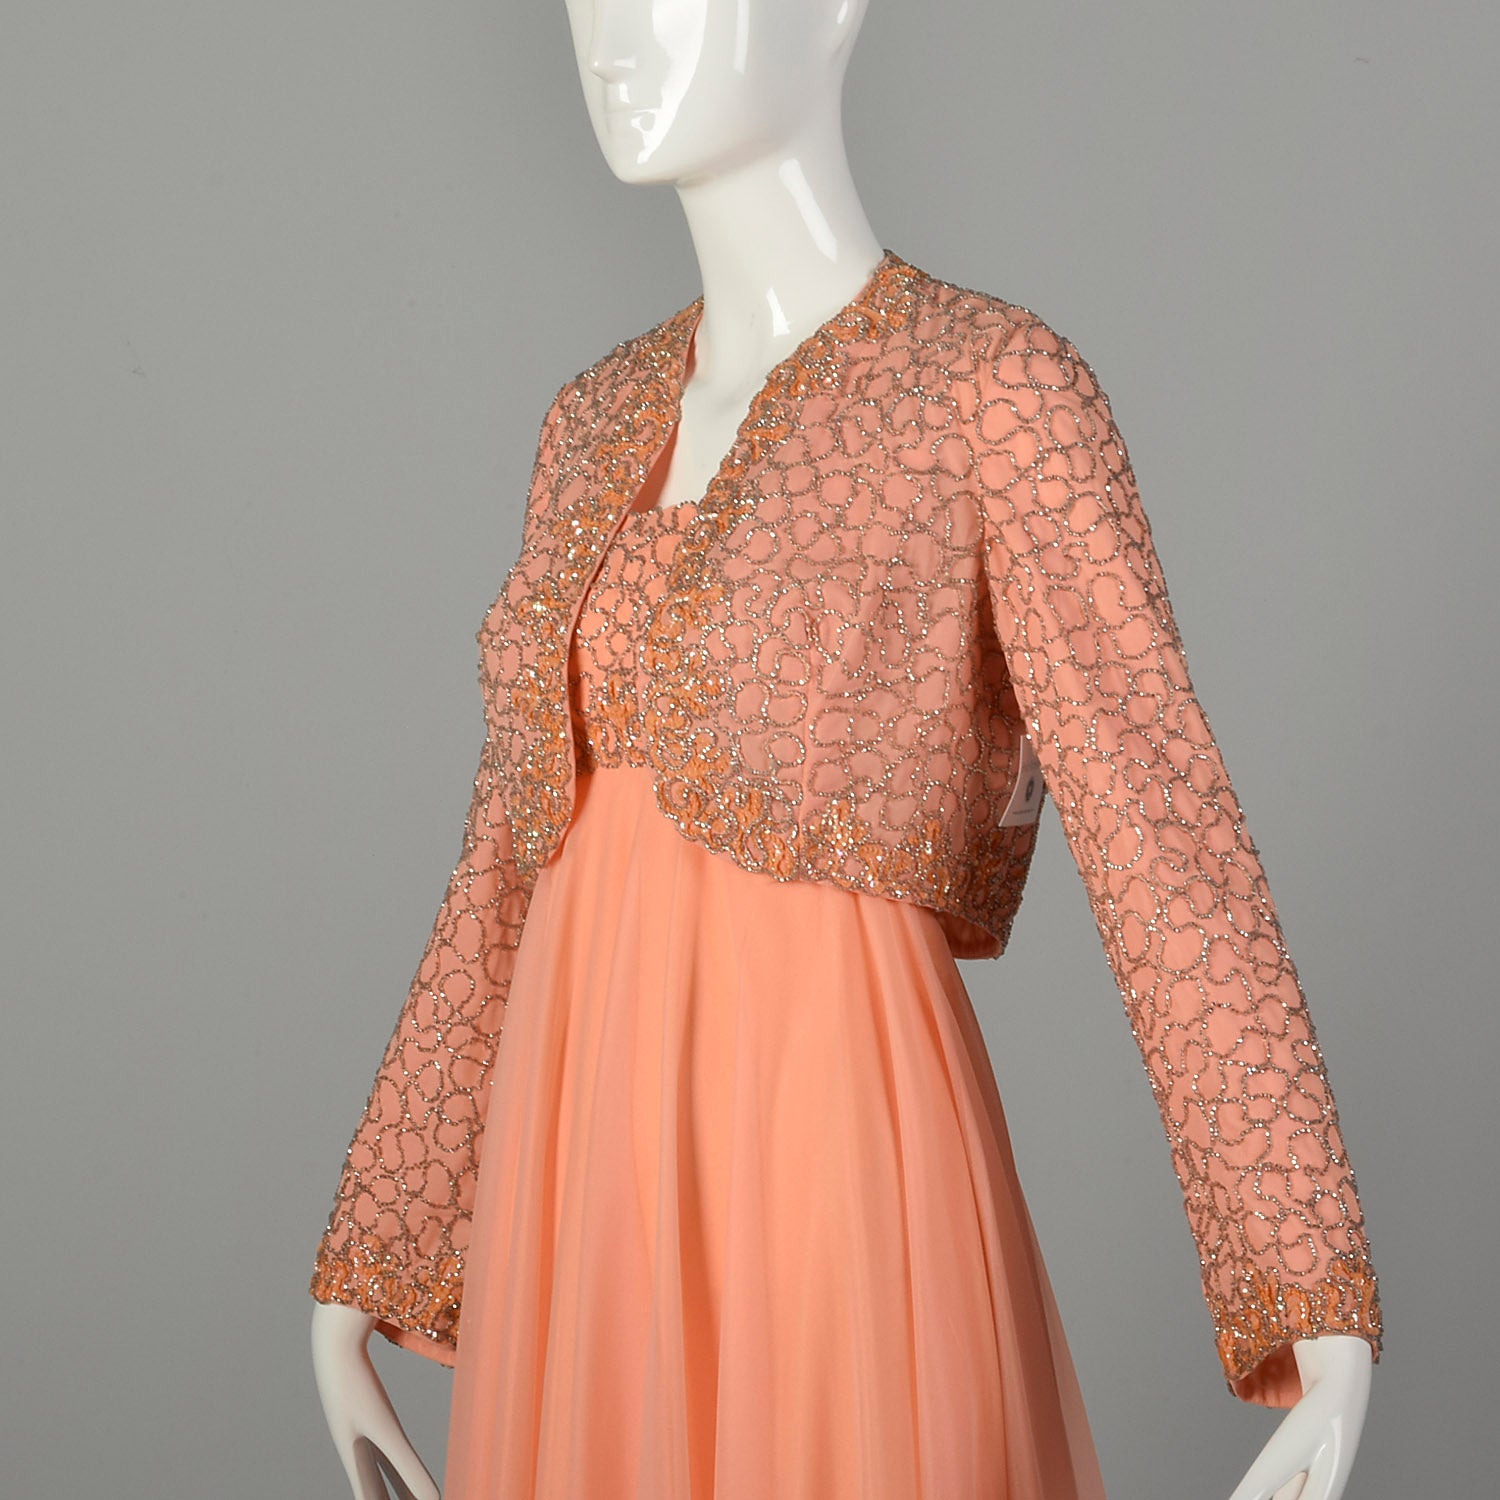 Small 1970s Mike Benet Set 2pc Orange Beaded Jacket Modest Maxi Prom Dress Formal Gown